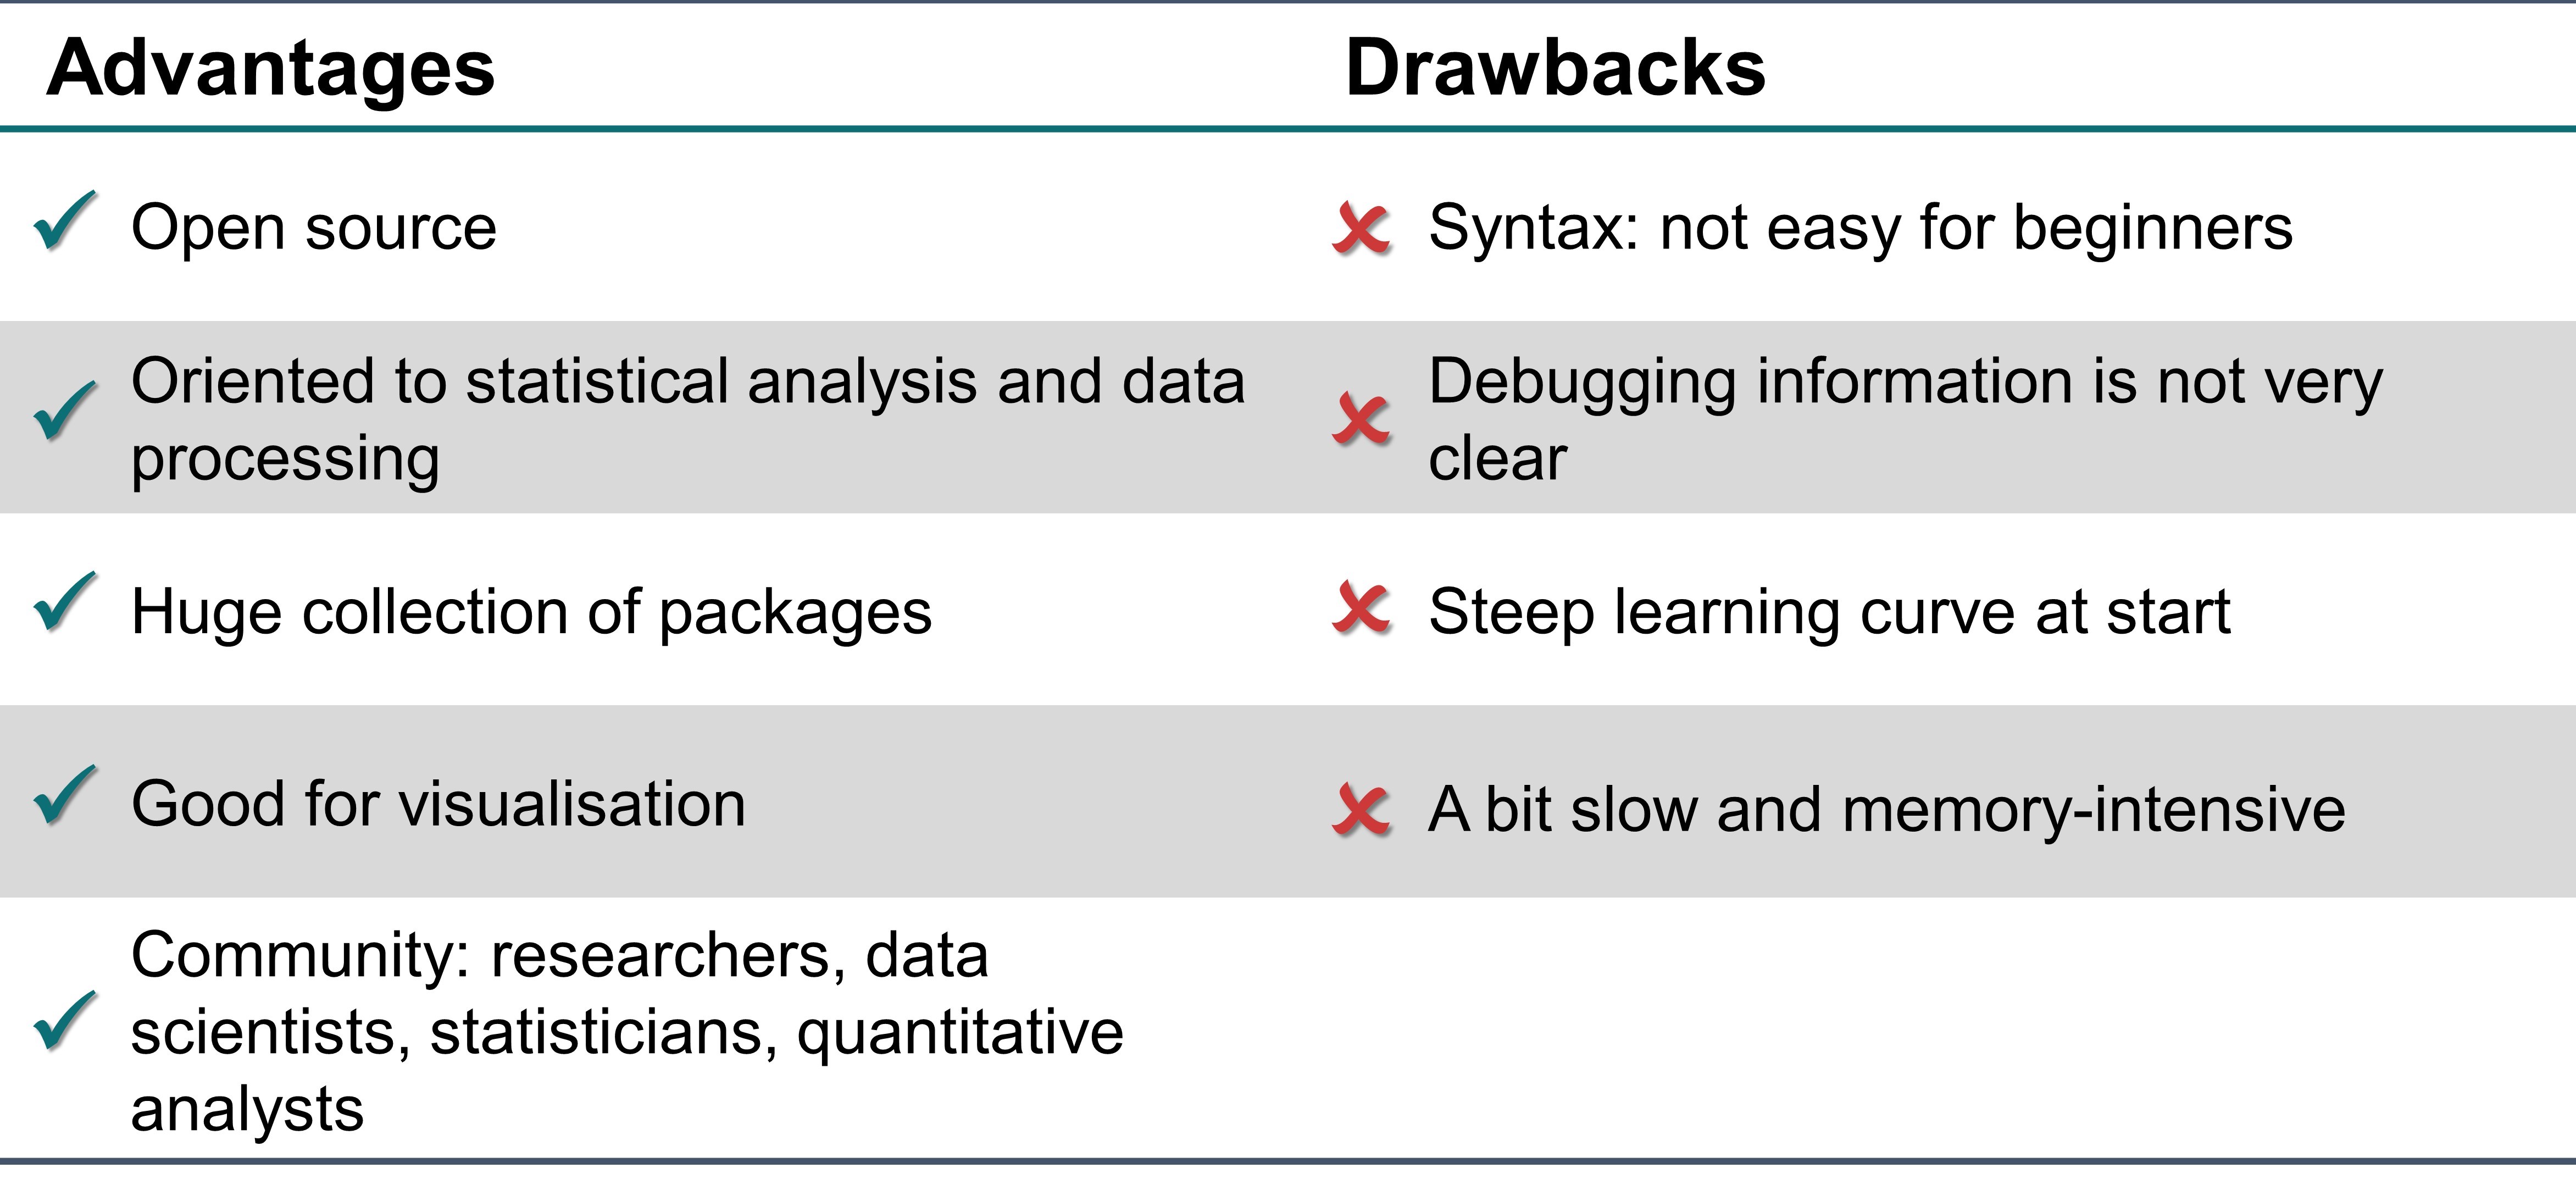 Table 6.4.1. The advantages and drawbacks of R